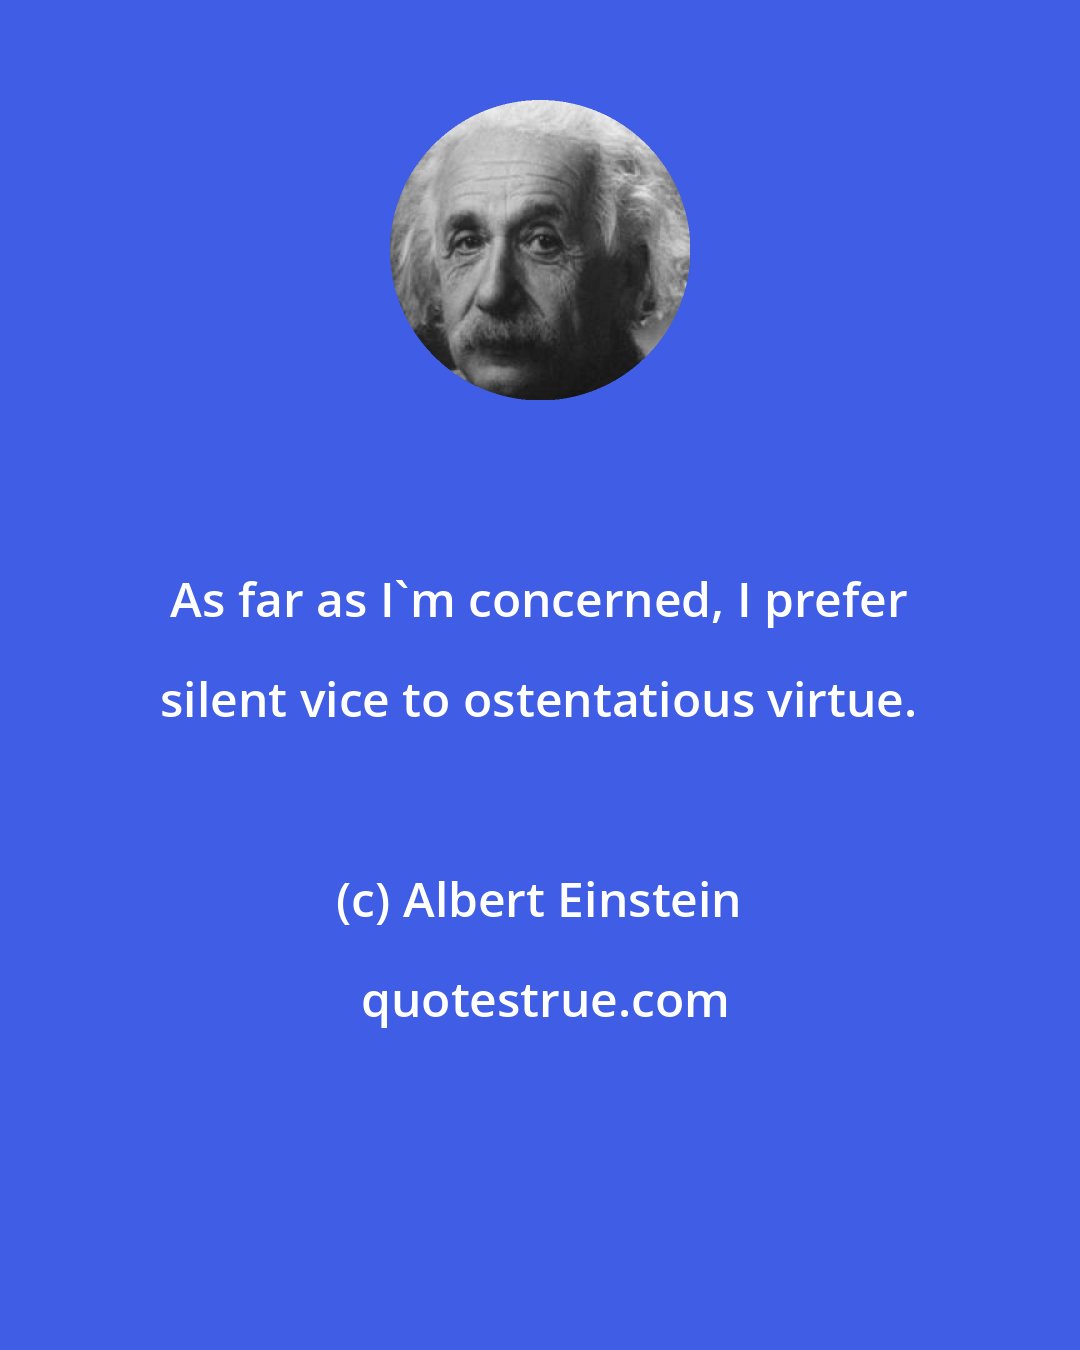 Albert Einstein: As far as I'm concerned, I prefer silent vice to ostentatious virtue.